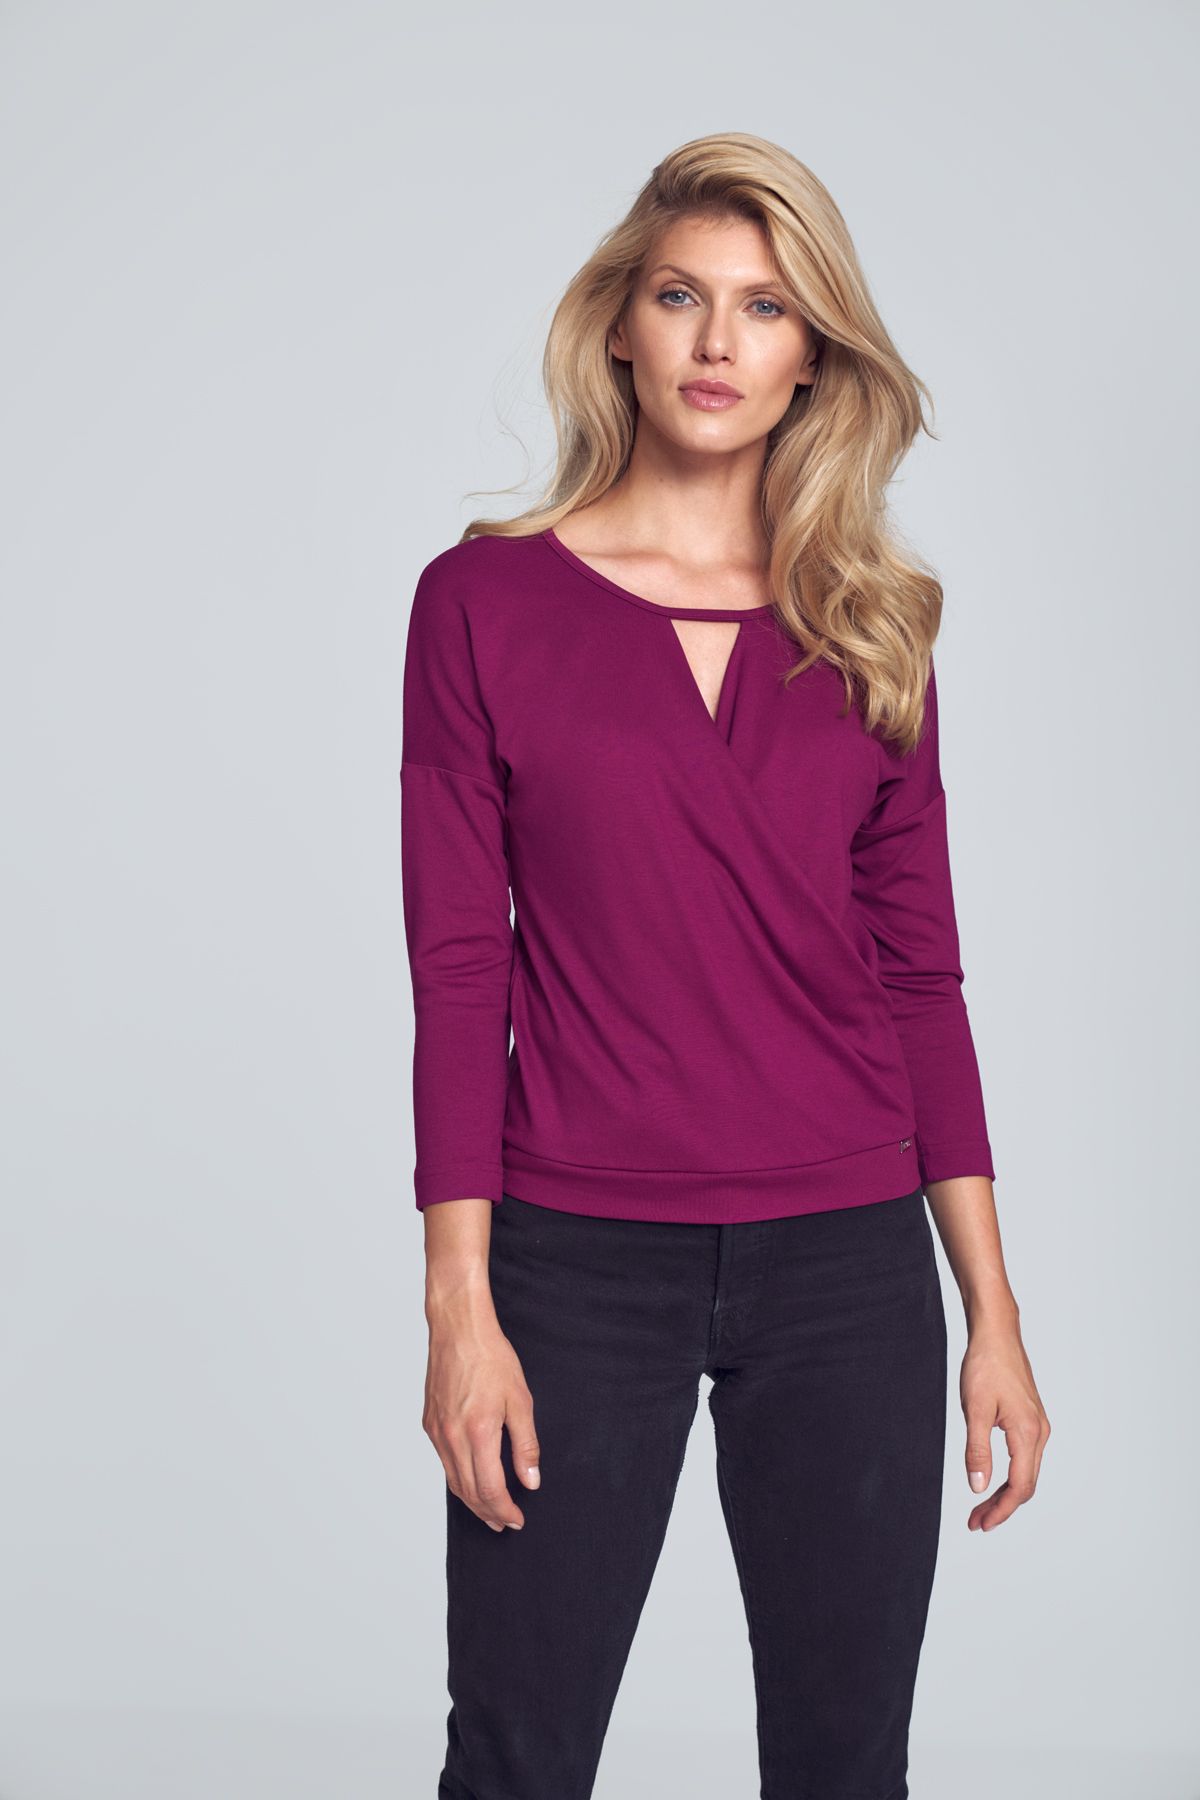 Fuchsia elegant short blouse with wrap neckline finished with decorative trimming, charming falling shoulder, ¾ sleeve, bottom finished with welt.